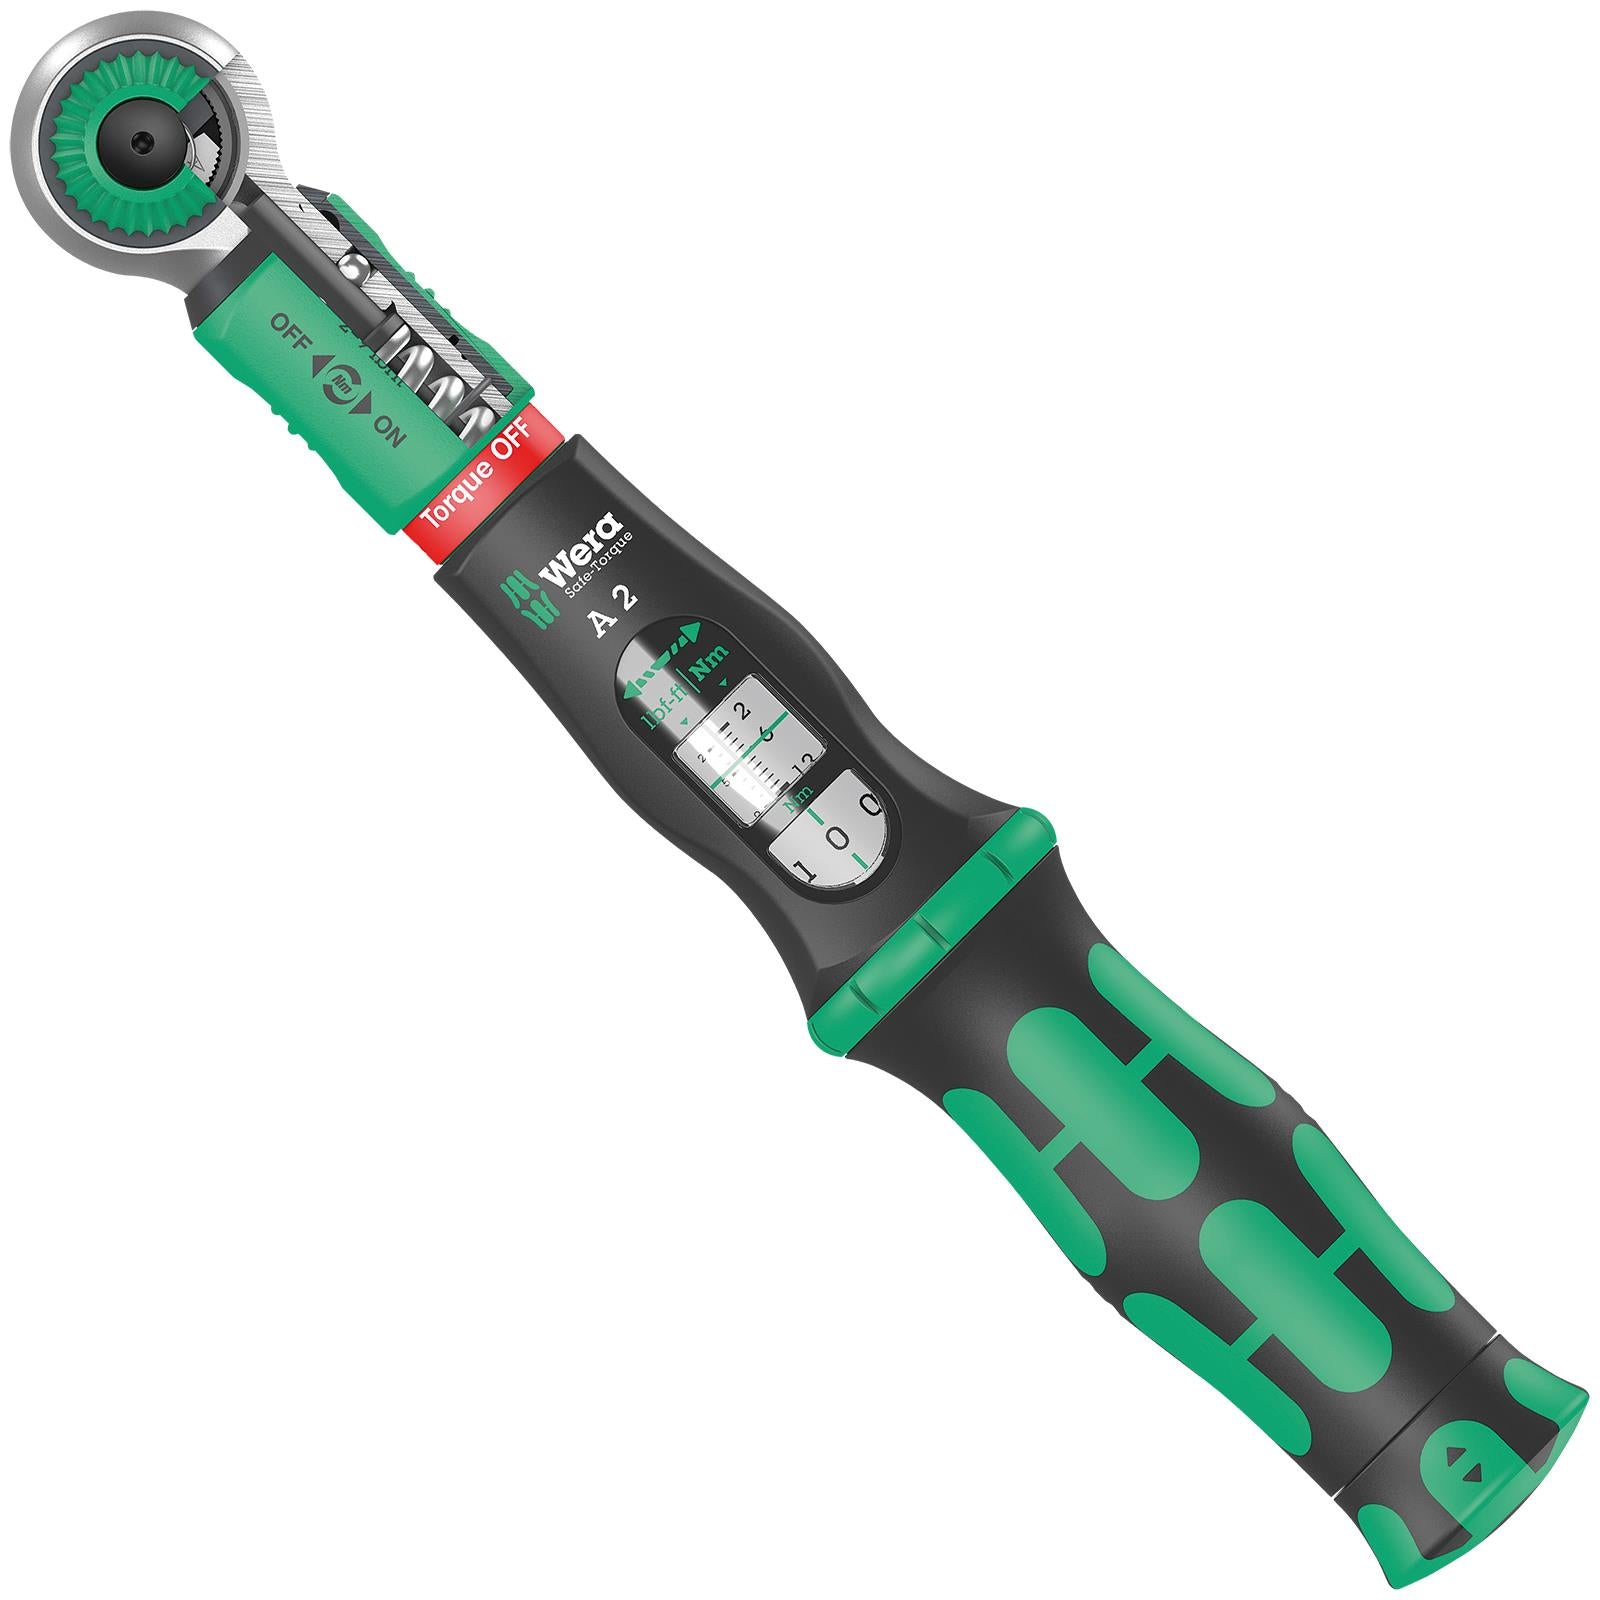 Wera Torque Wrench Safe-Torque A 2 1/4" Hex Drive 2-12 Nm Reversible